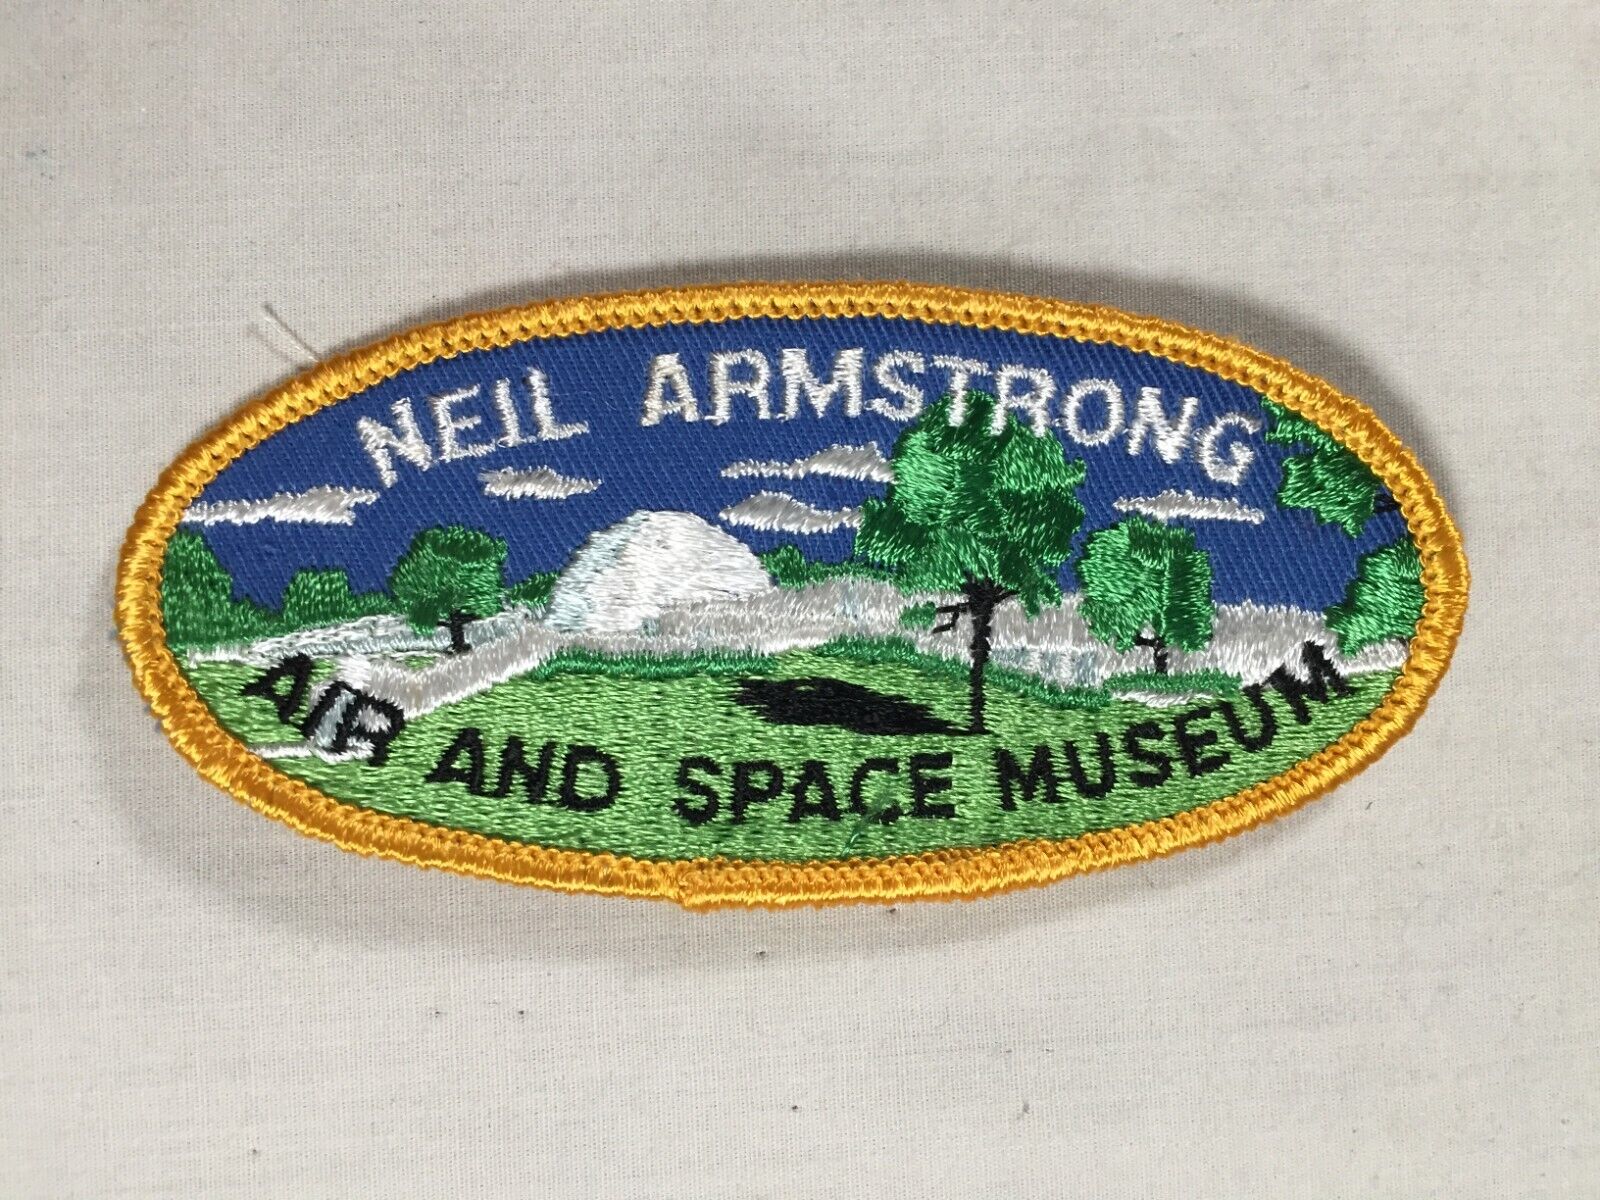 Neil Armstrong Air and Space Museum BSA Activity Patch